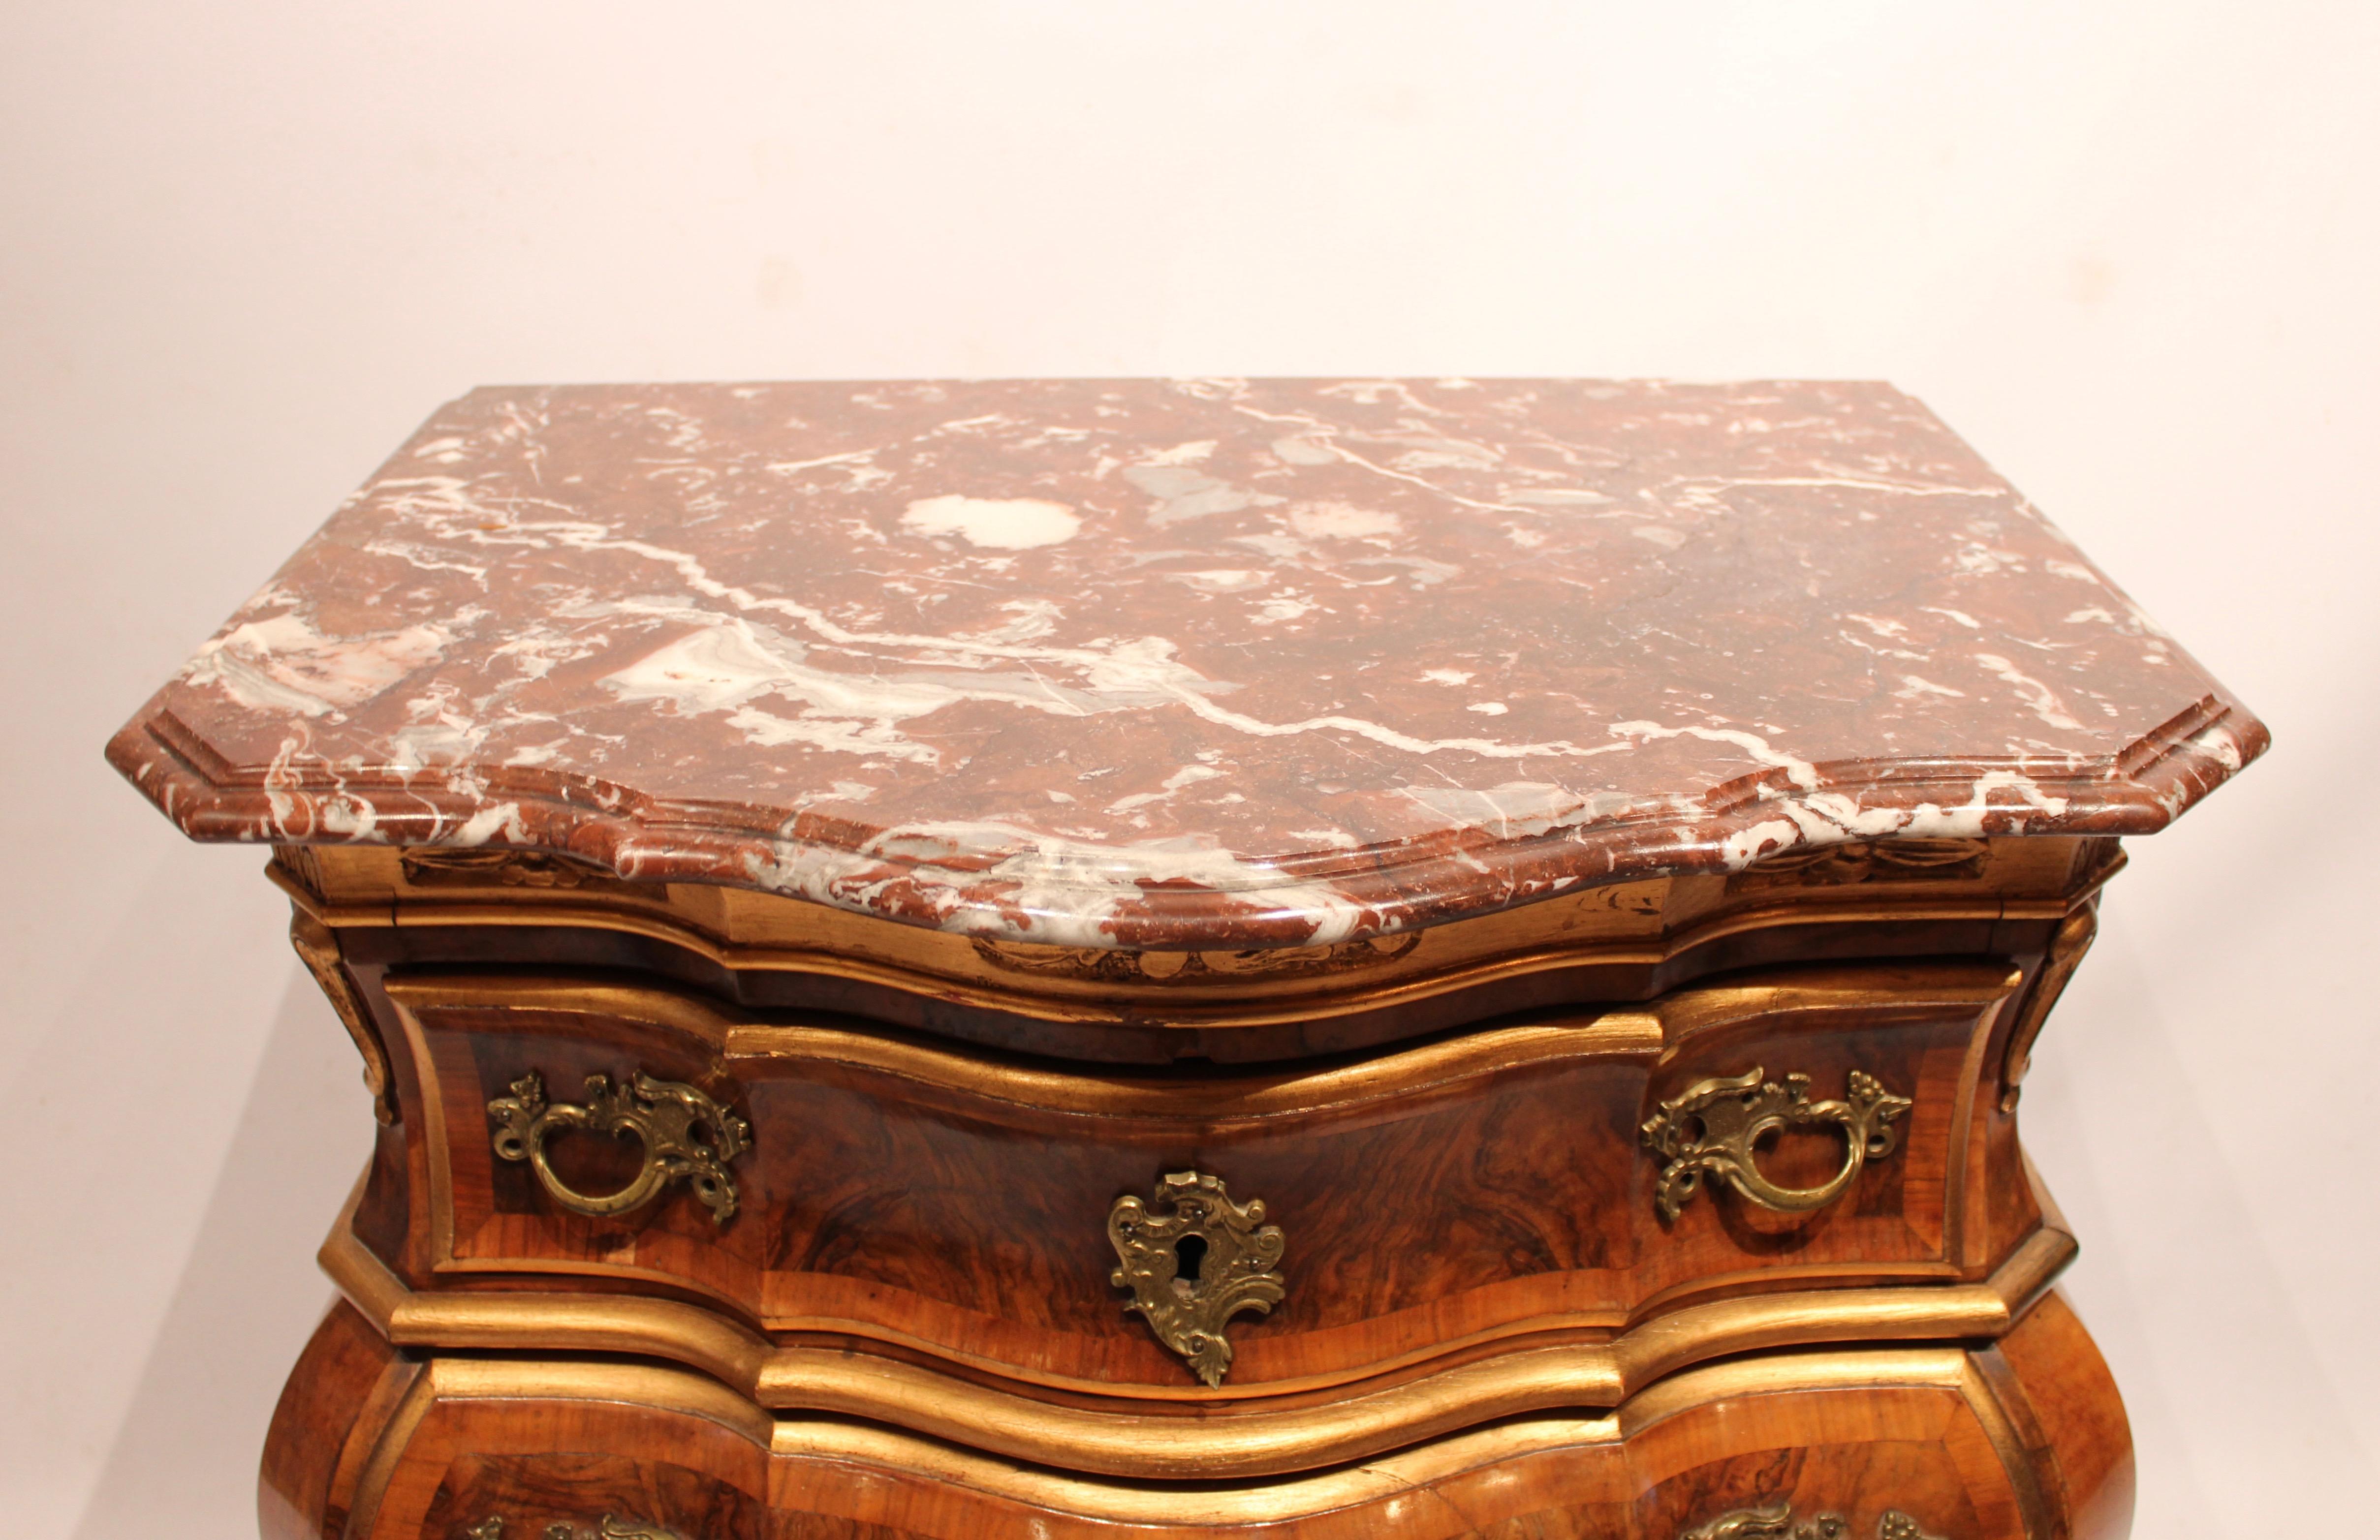 Danish Chest of Drawers of Walnut with Marble Top Plate from Denmark, circa 1880s